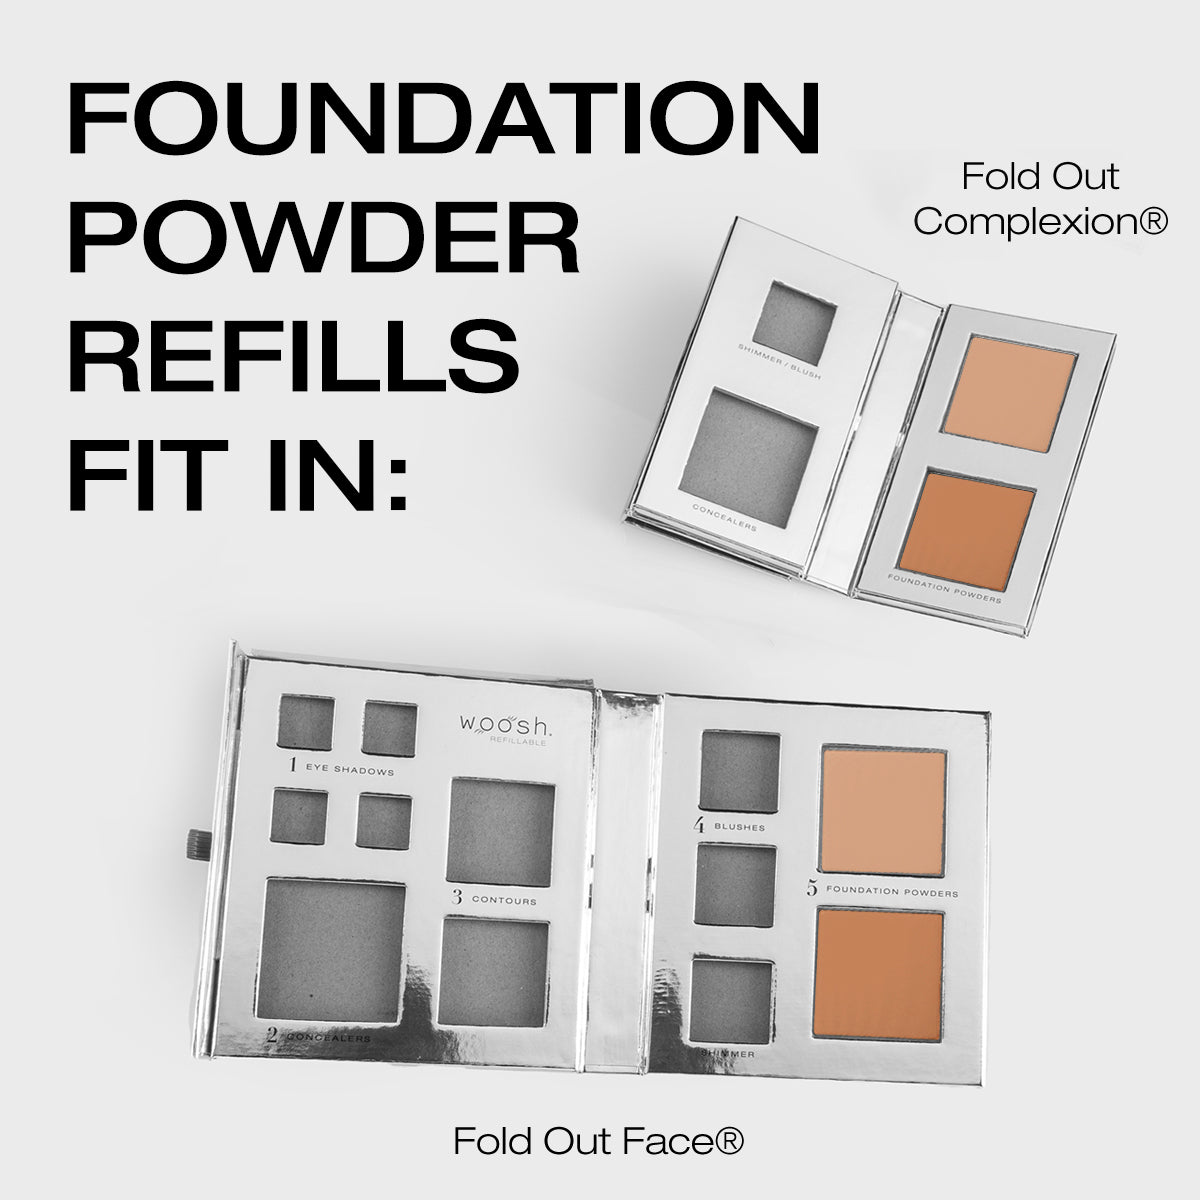 Foundation powder refills fit in the fold out complexion and fold out face